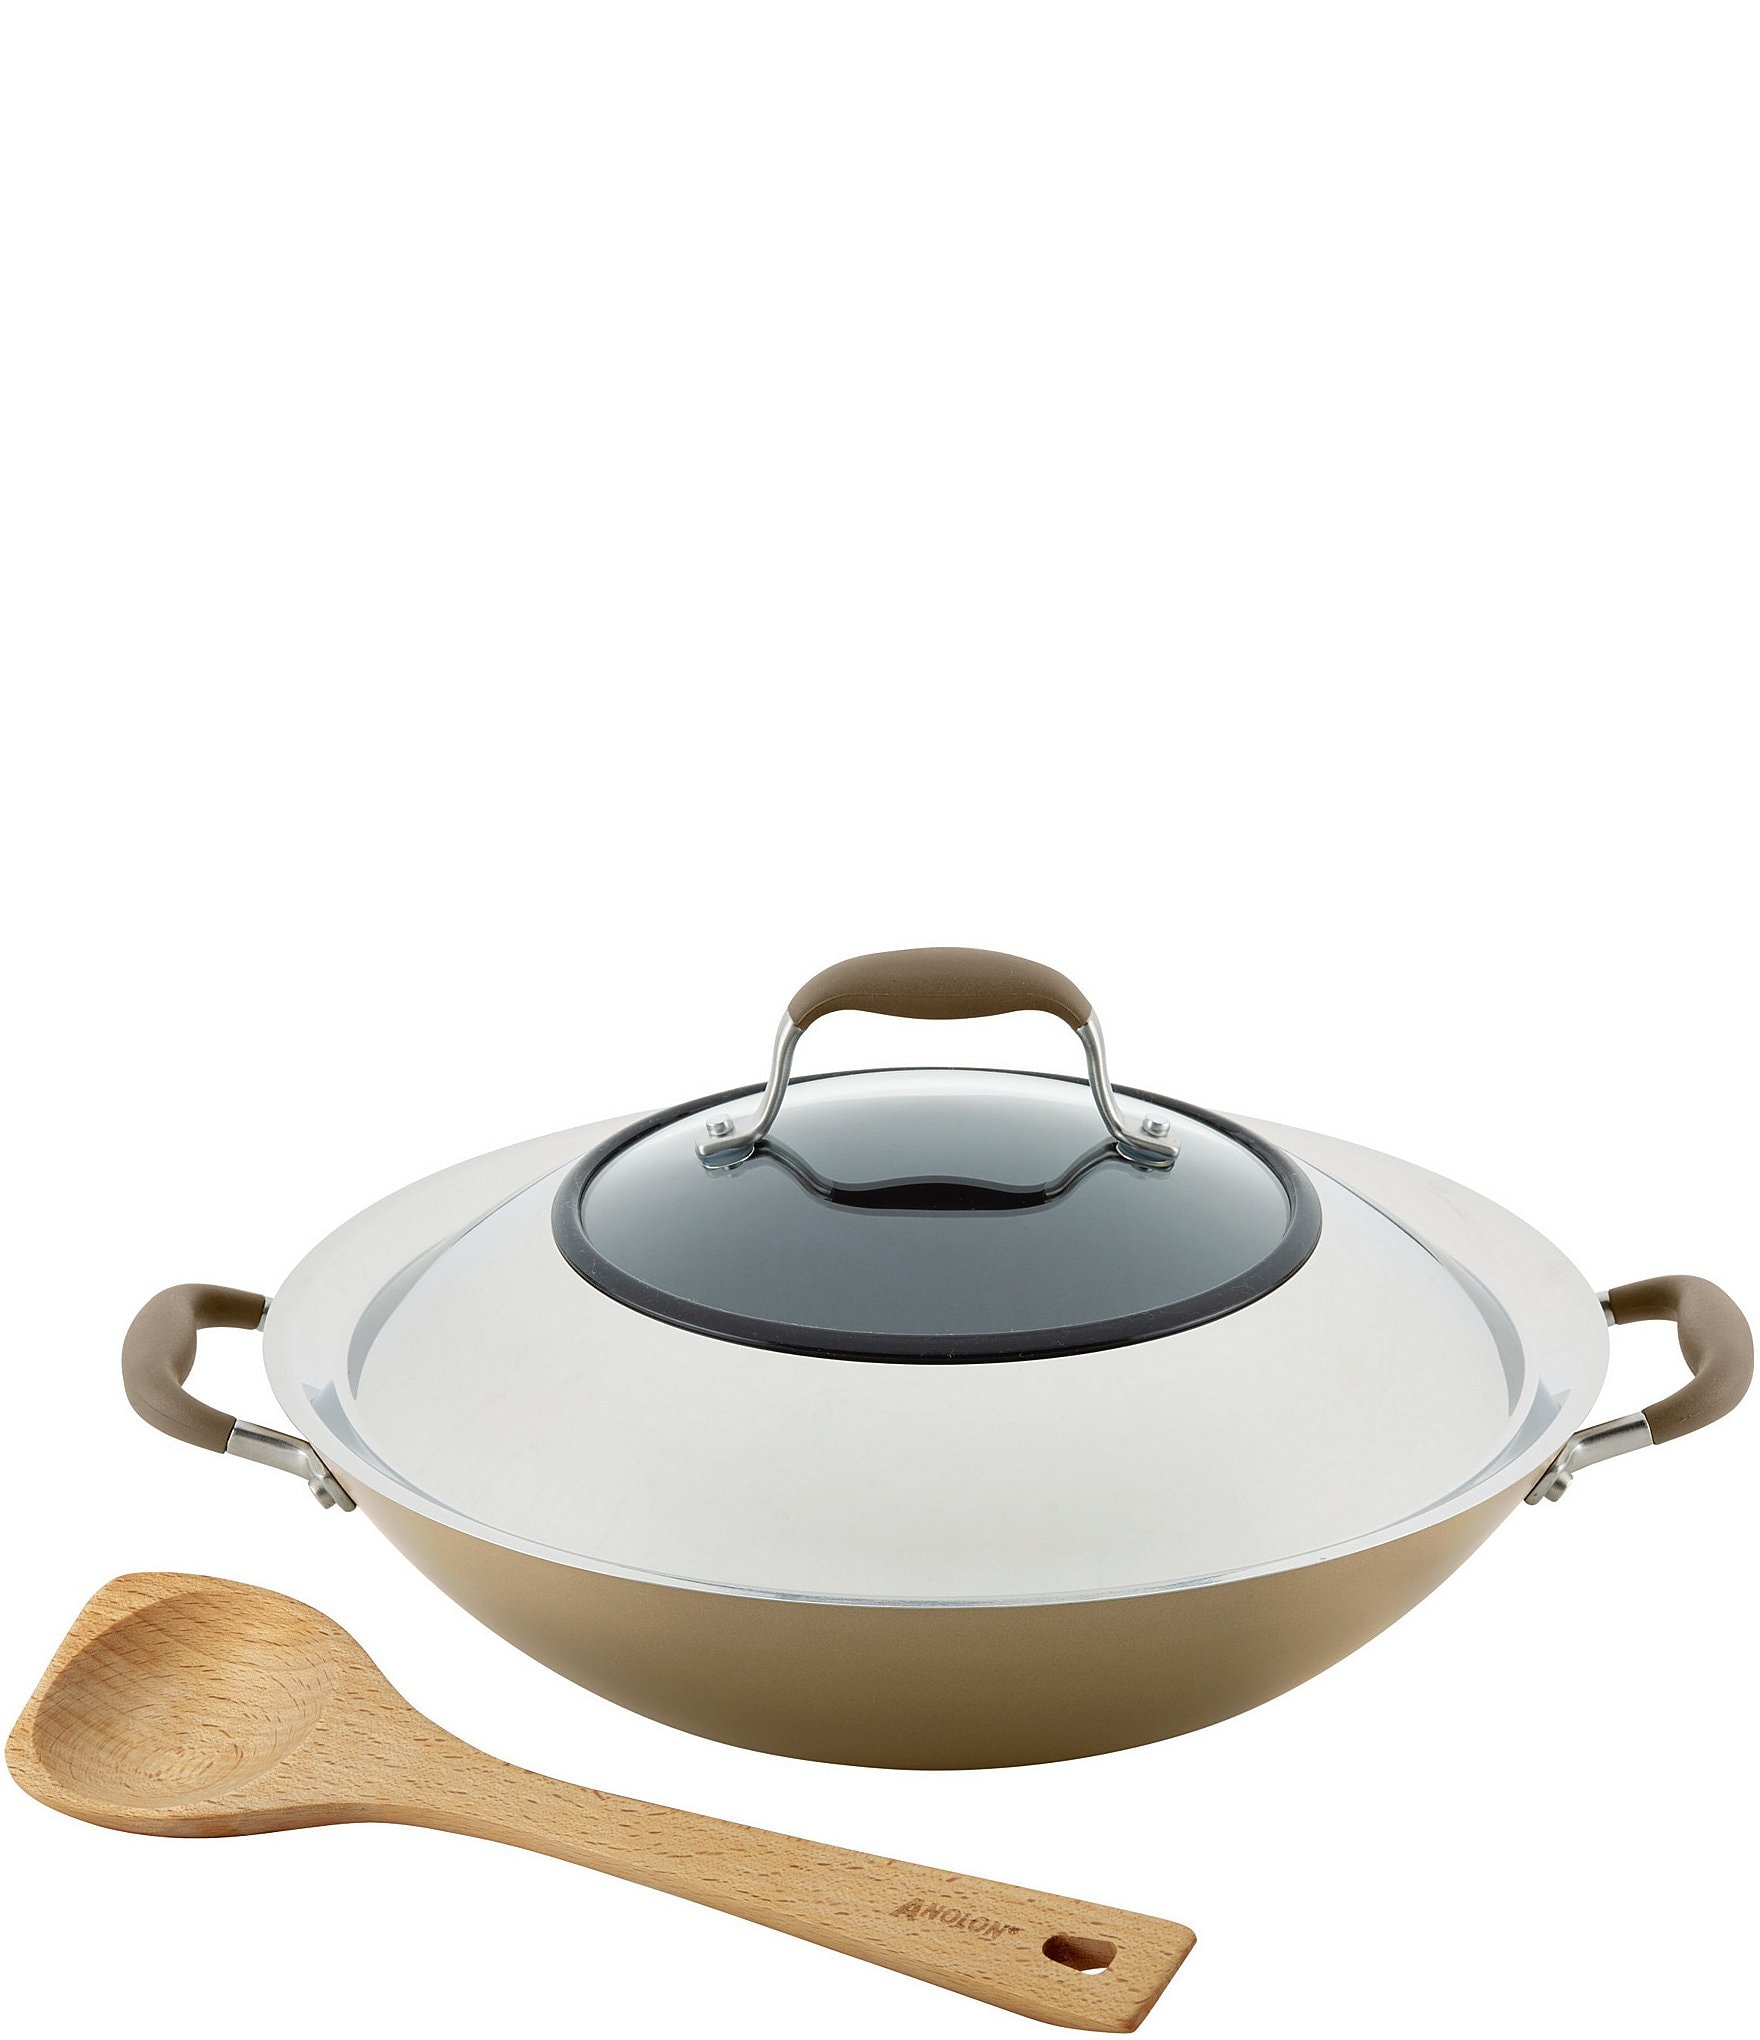 https://dimg.dillards.com/is/image/DillardsZoom/zoom/anolon-advanced-home-hard-anodized-nonstick-bronze-covered-wok-with-handles-and-wooden-spoon/05835313_zi.jpg